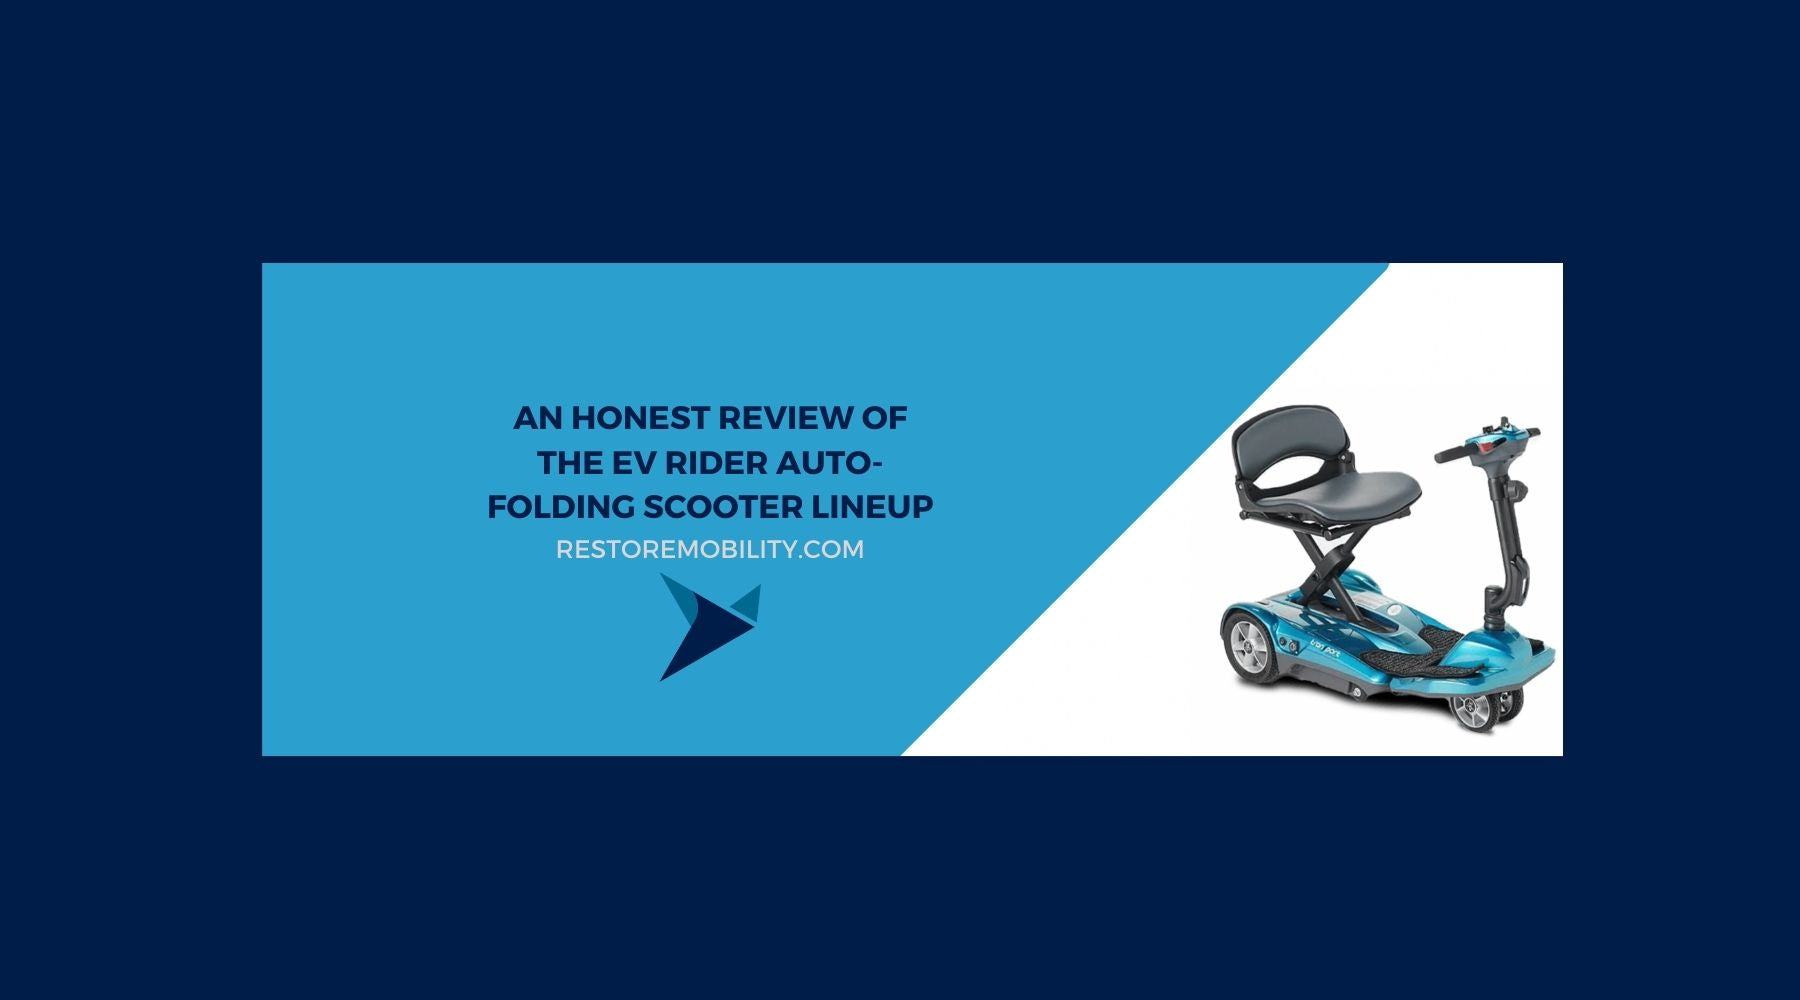 Reviewing the EV Rider Auto-Folding Scooter Lineup